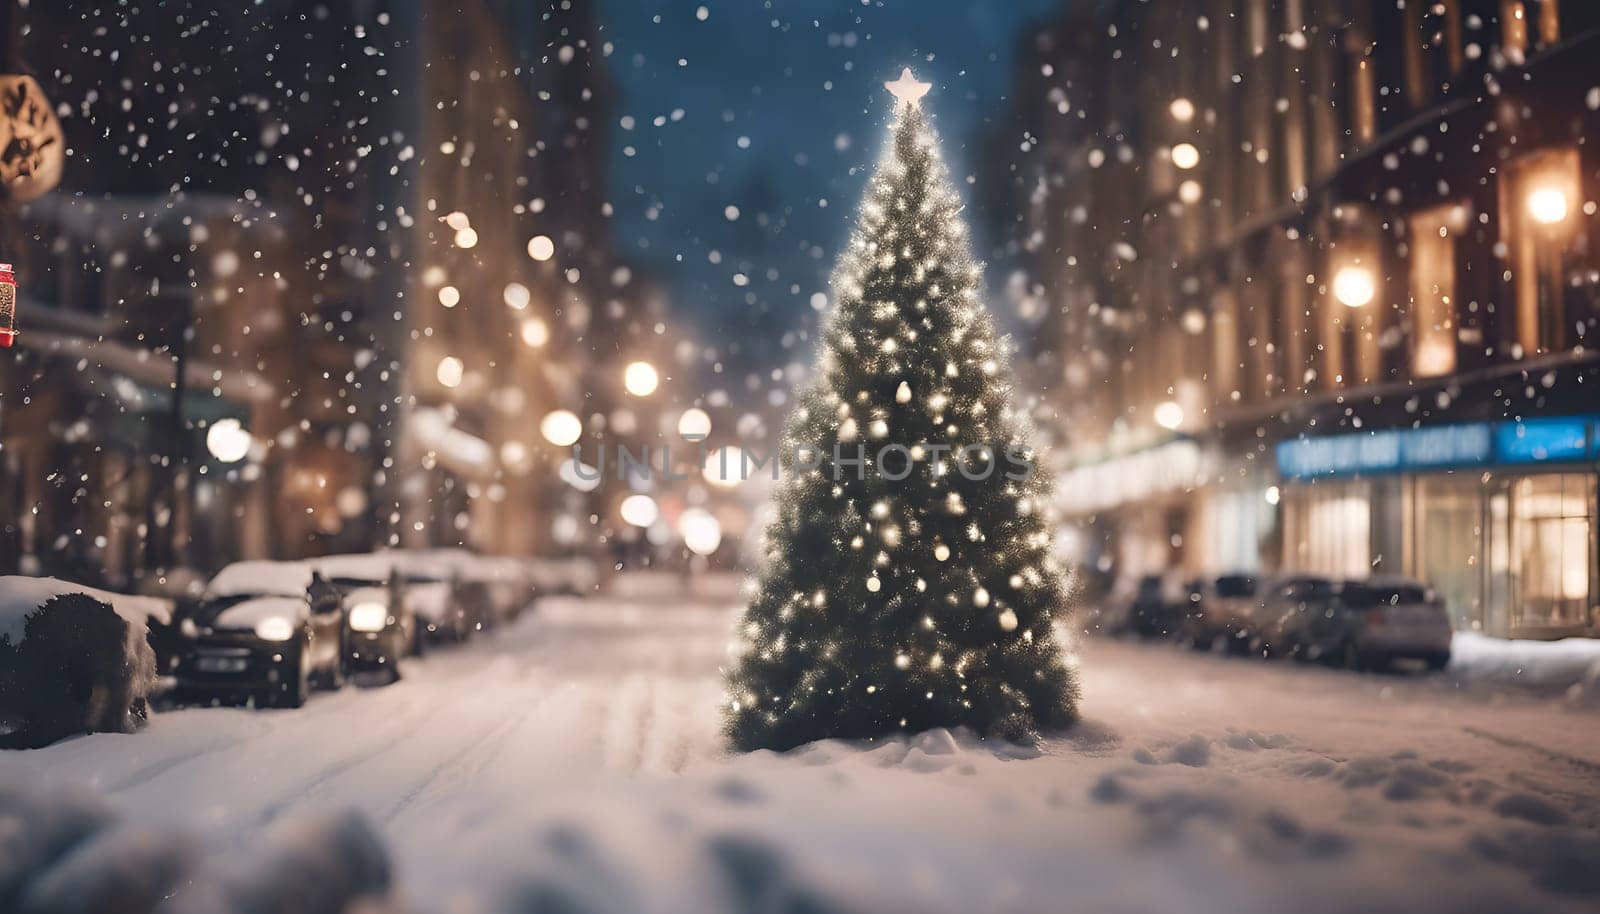 Blurred background. City view, lights, falling snow, night, street, bokeh spots of headlights of moving cars. Diffuse Urban backdrop winter scenery of street in city at night. Lantern light, snowfall. High quality photo